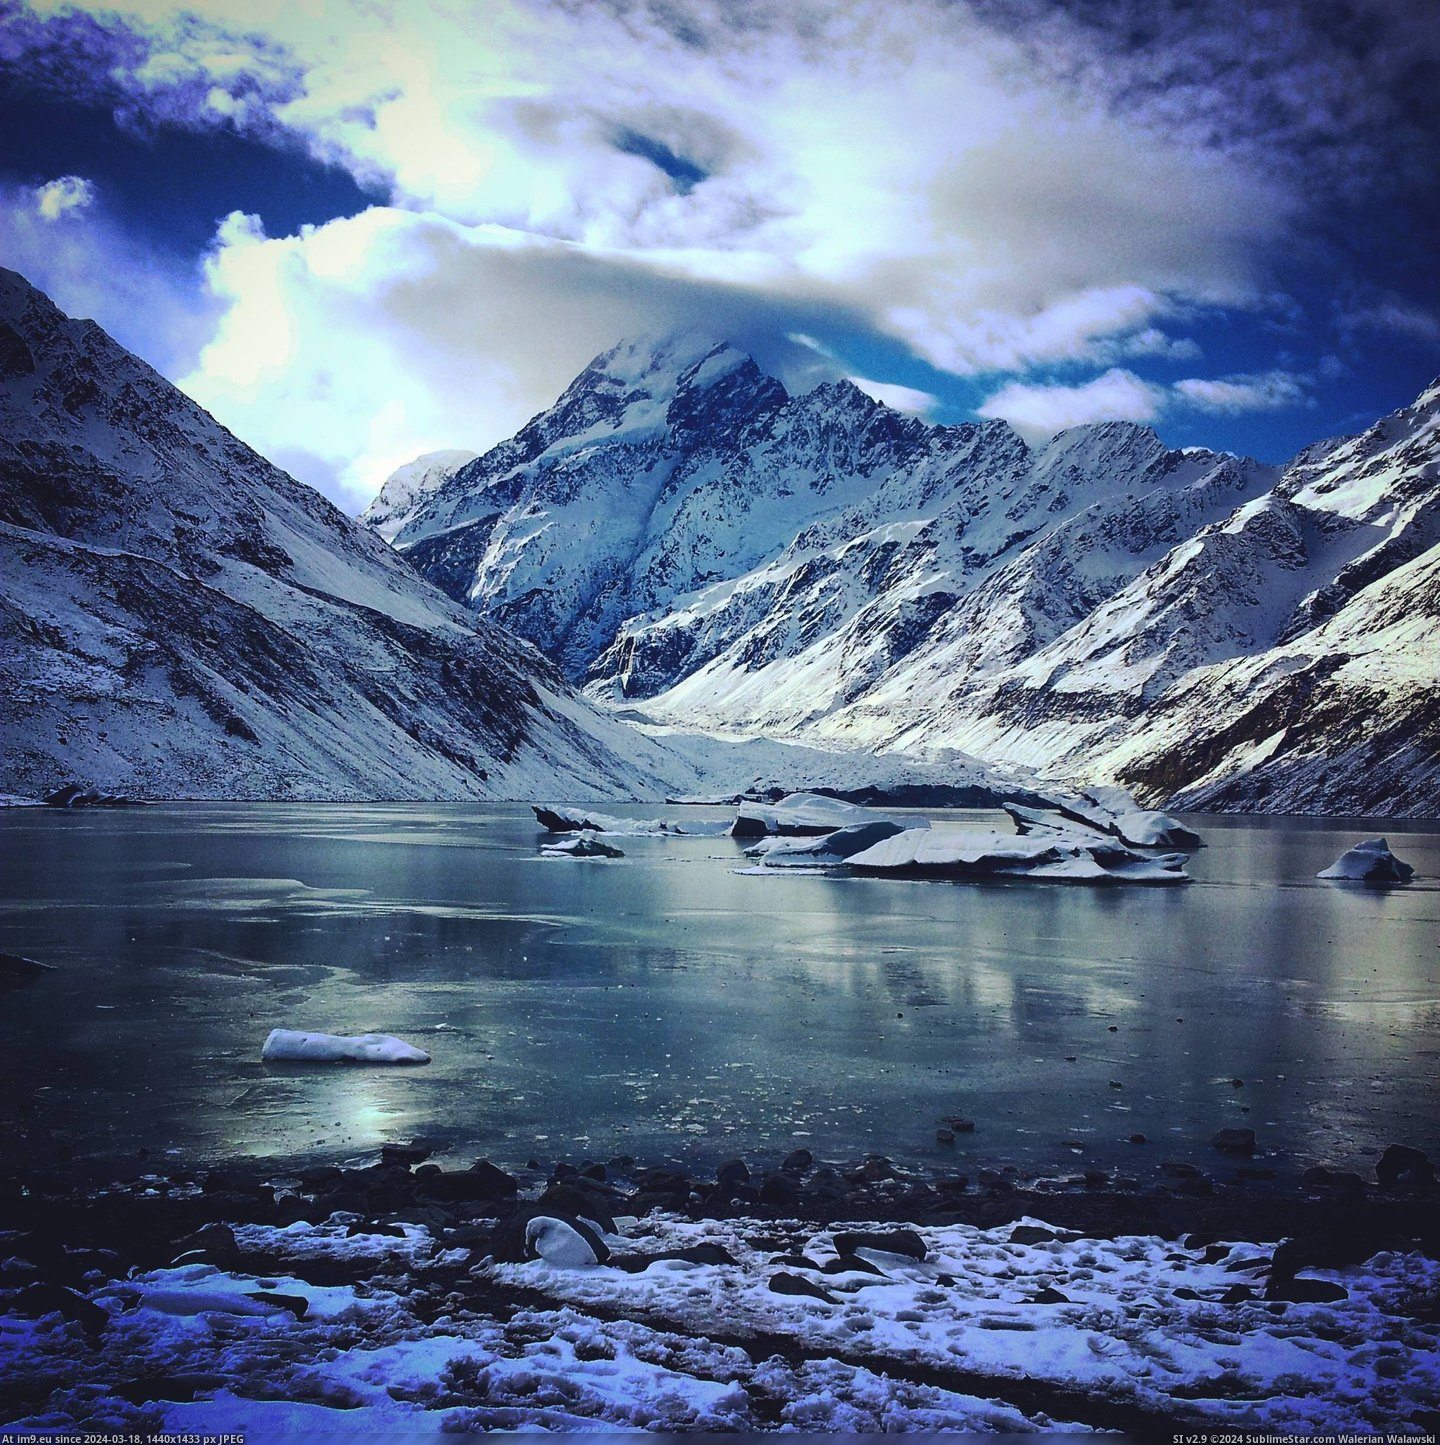 #Hooker #Lake #End #Frozen #Track #Cook #Valley #Mount #Zealand [Earthporn] The frozen lake at the end of the Hooker Valley track, Mount Cook, New Zealand [2448x2448px] Pic. (Изображение из альбом My r/EARTHPORN favs))